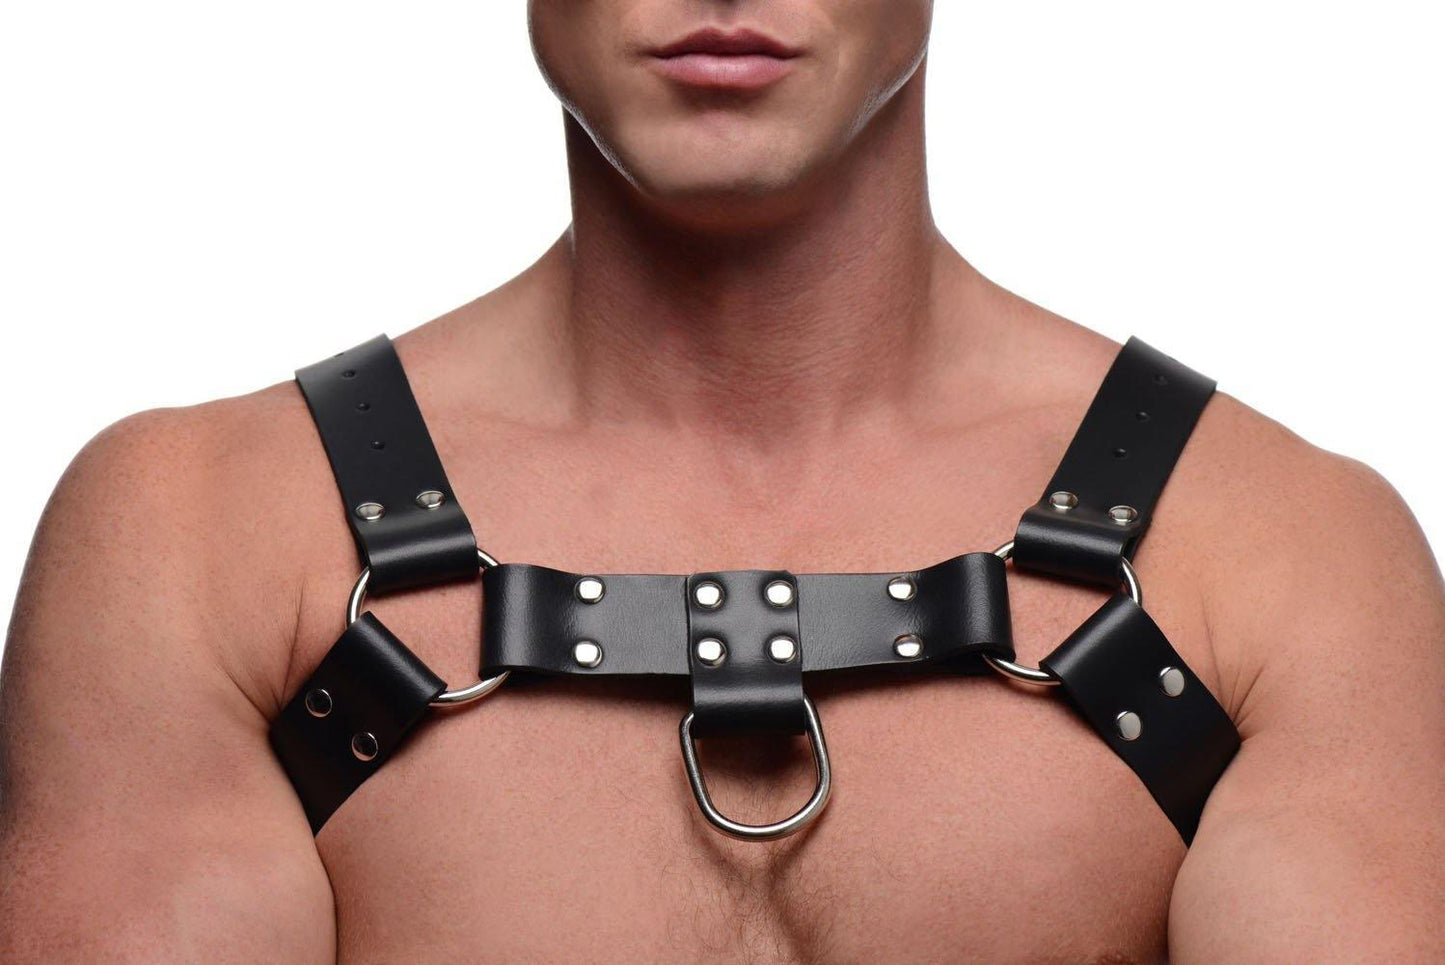 English Bull Dog Harness With Cock Strap - My Sex Toy Hub